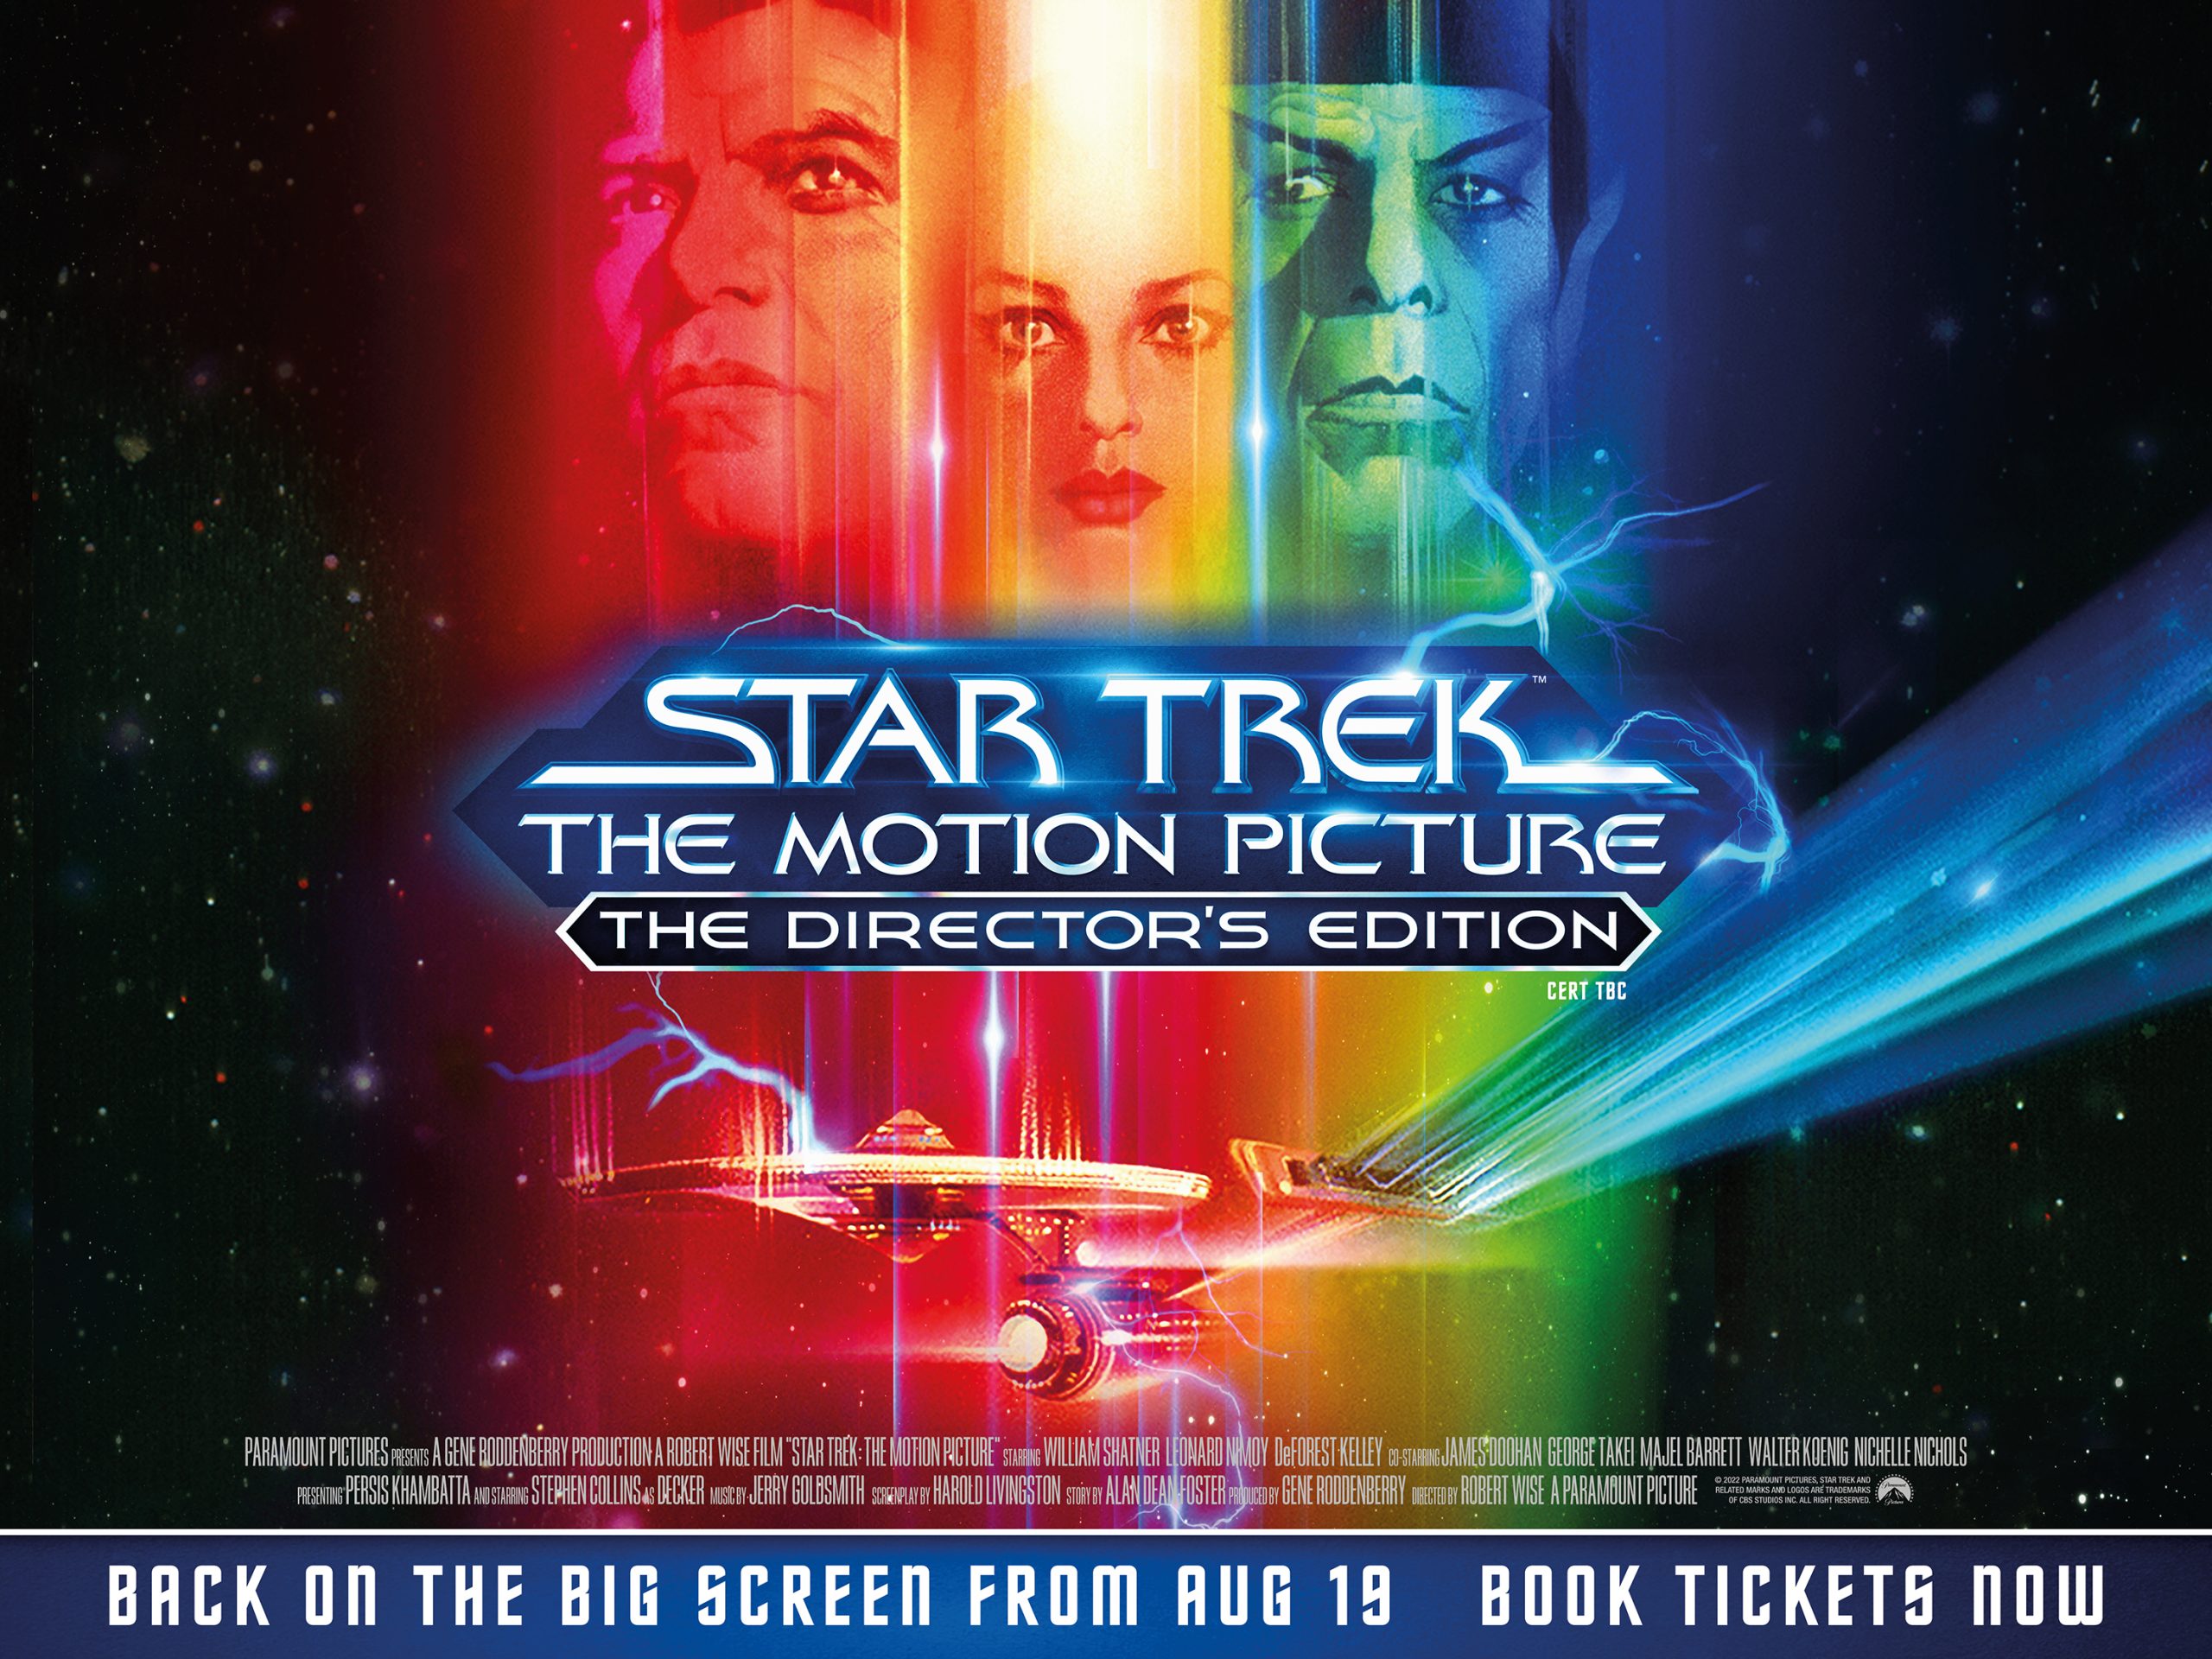 star trek the motion picture what's it about